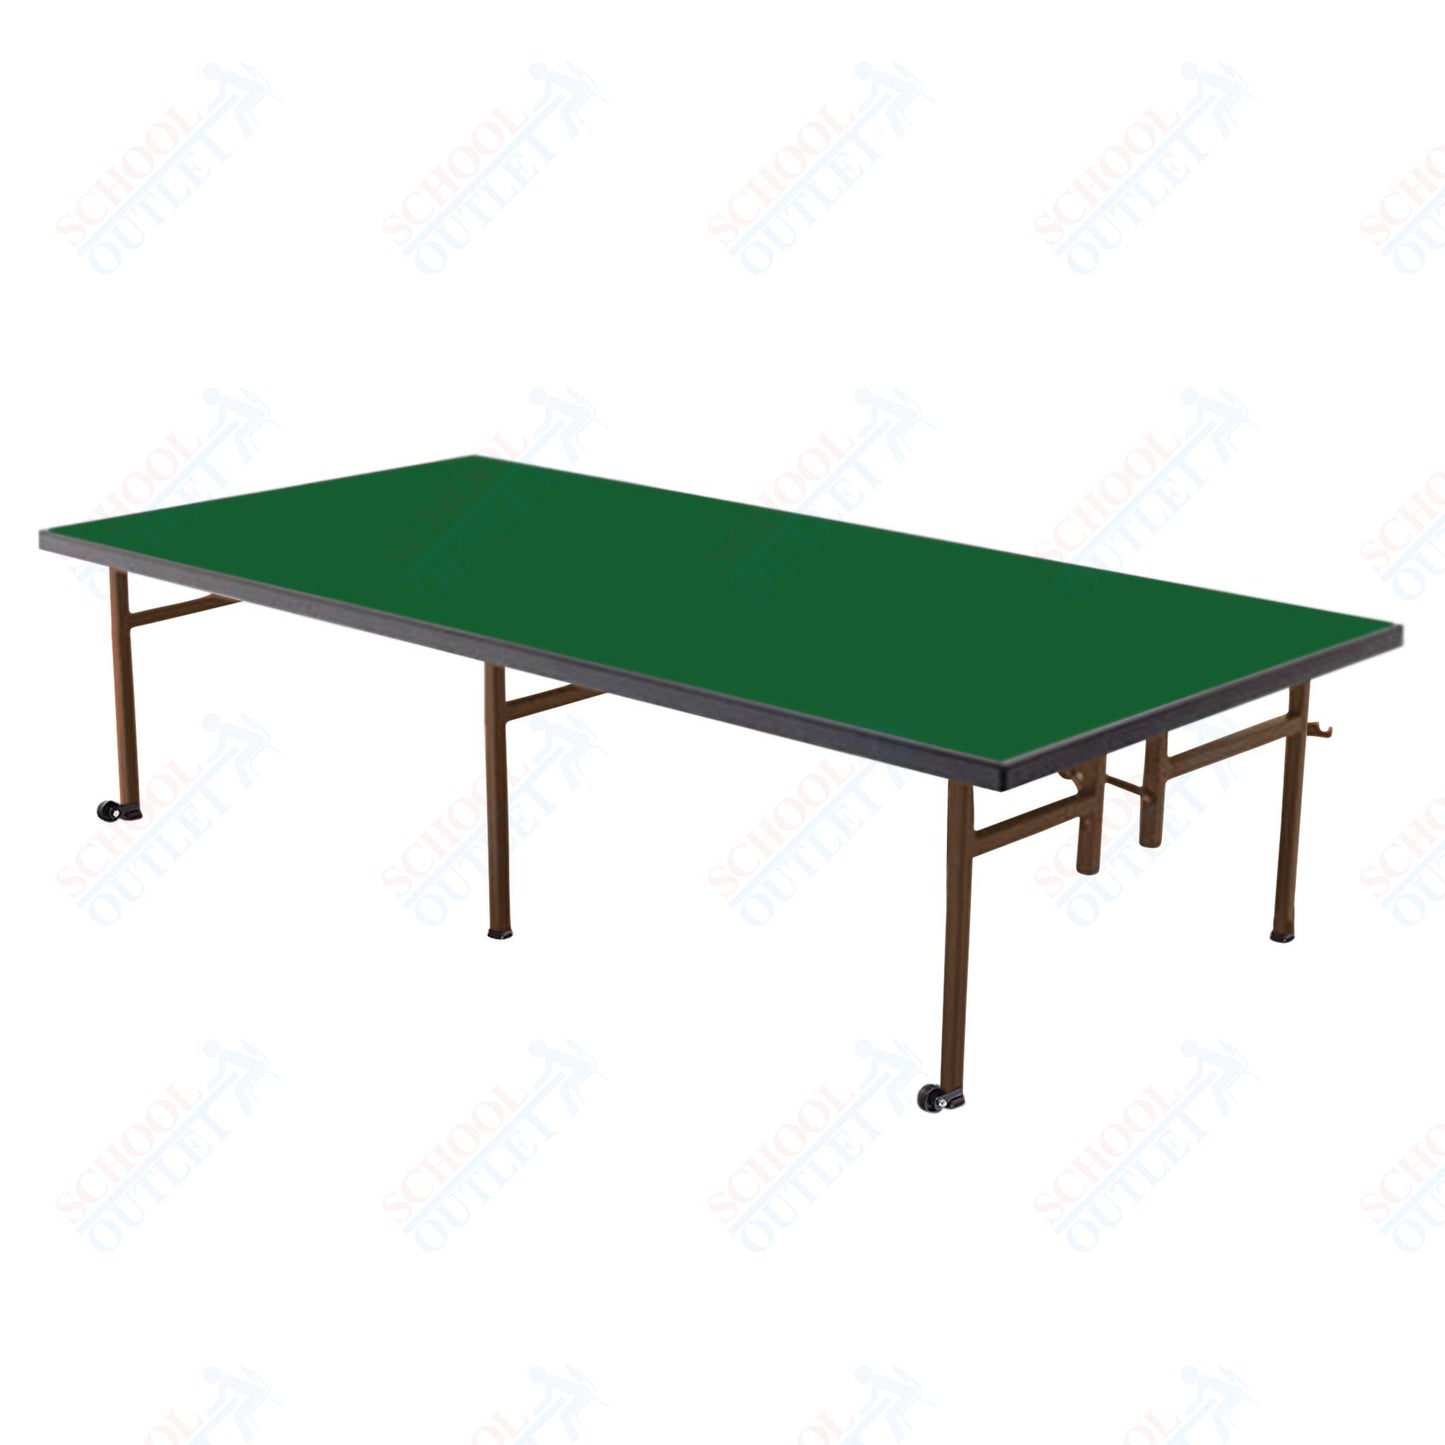 AmTab Fixed Height Stage - Carpet Top - 36"W x 96"L x 32"H (AmTab AMT - ST3832C) - SchoolOutlet